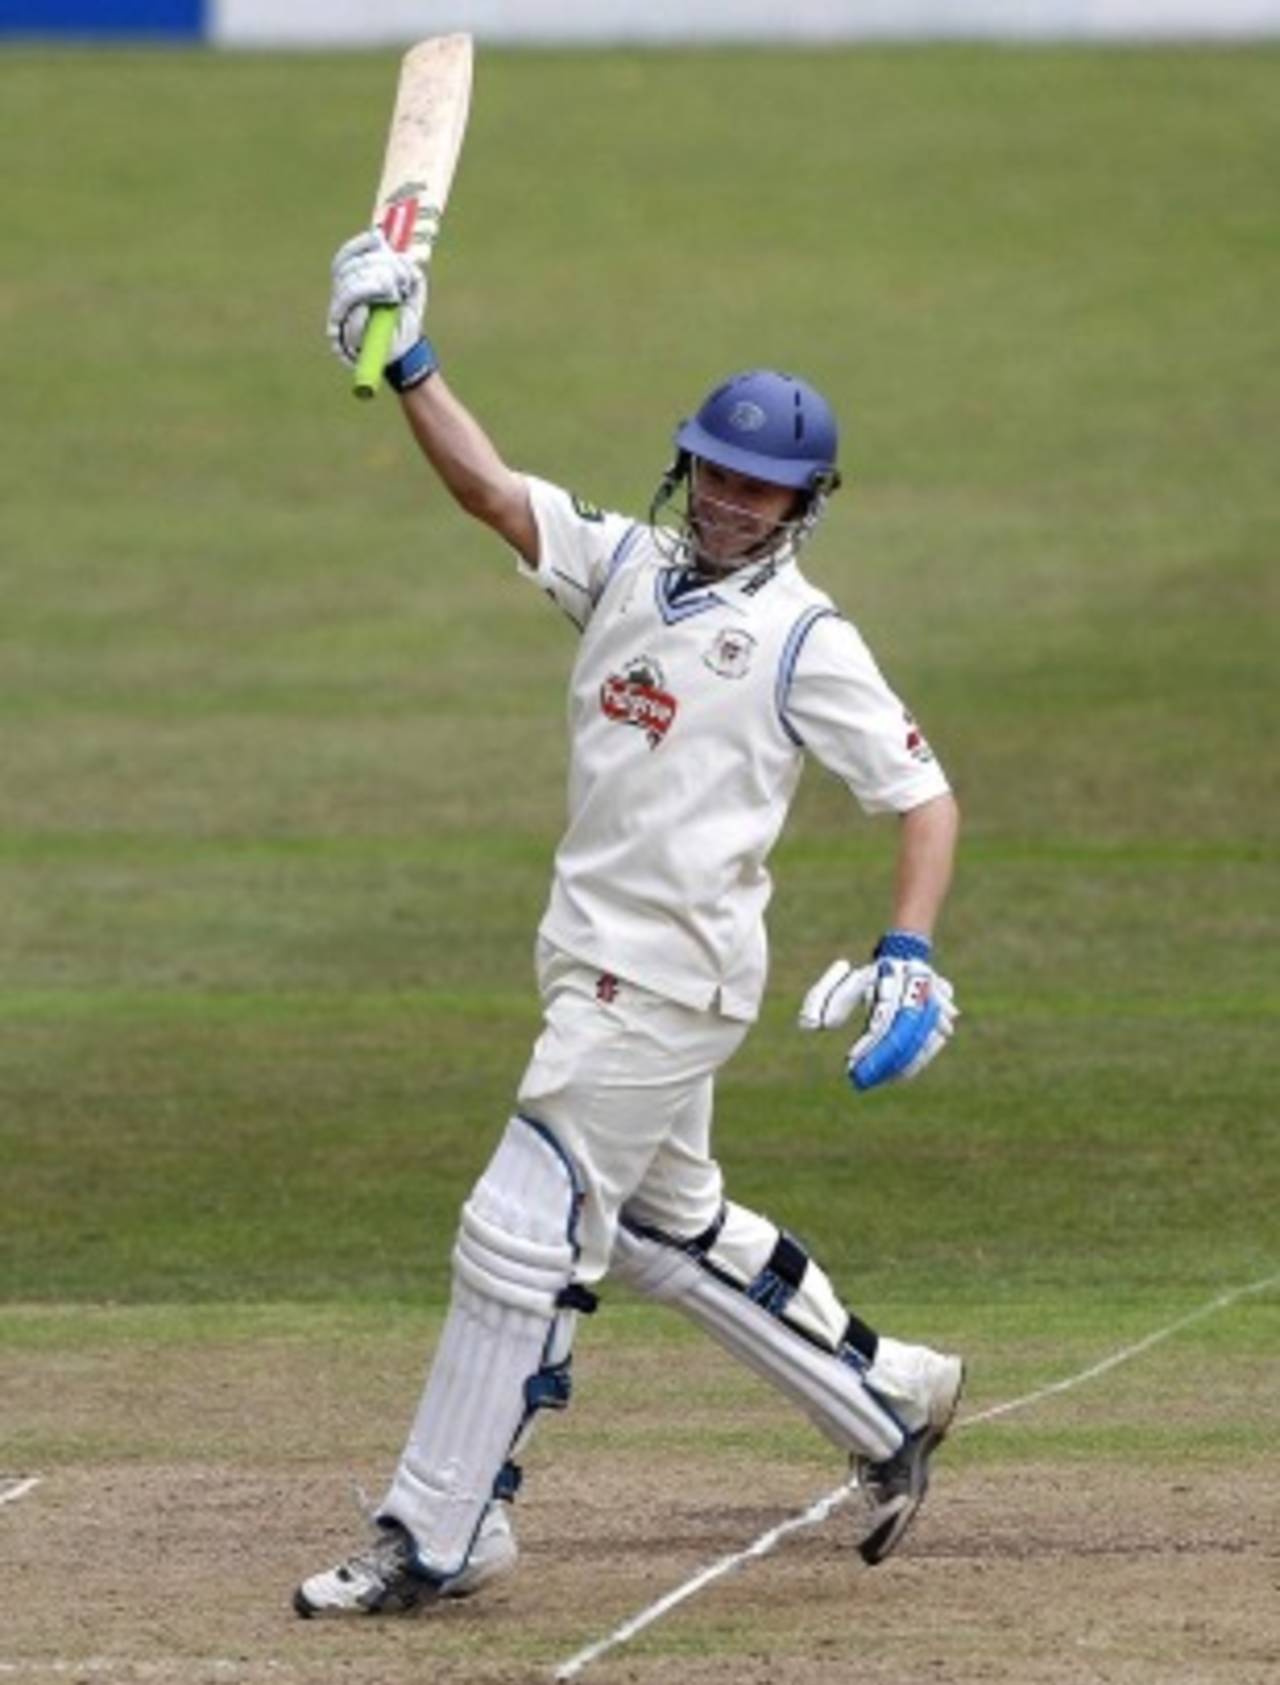 Will Porterfield celebrates his hundred against Worcestershire, Gloucestershire v Worcestershire, County Championship Division Two, Cheltenham, August 4, 2010